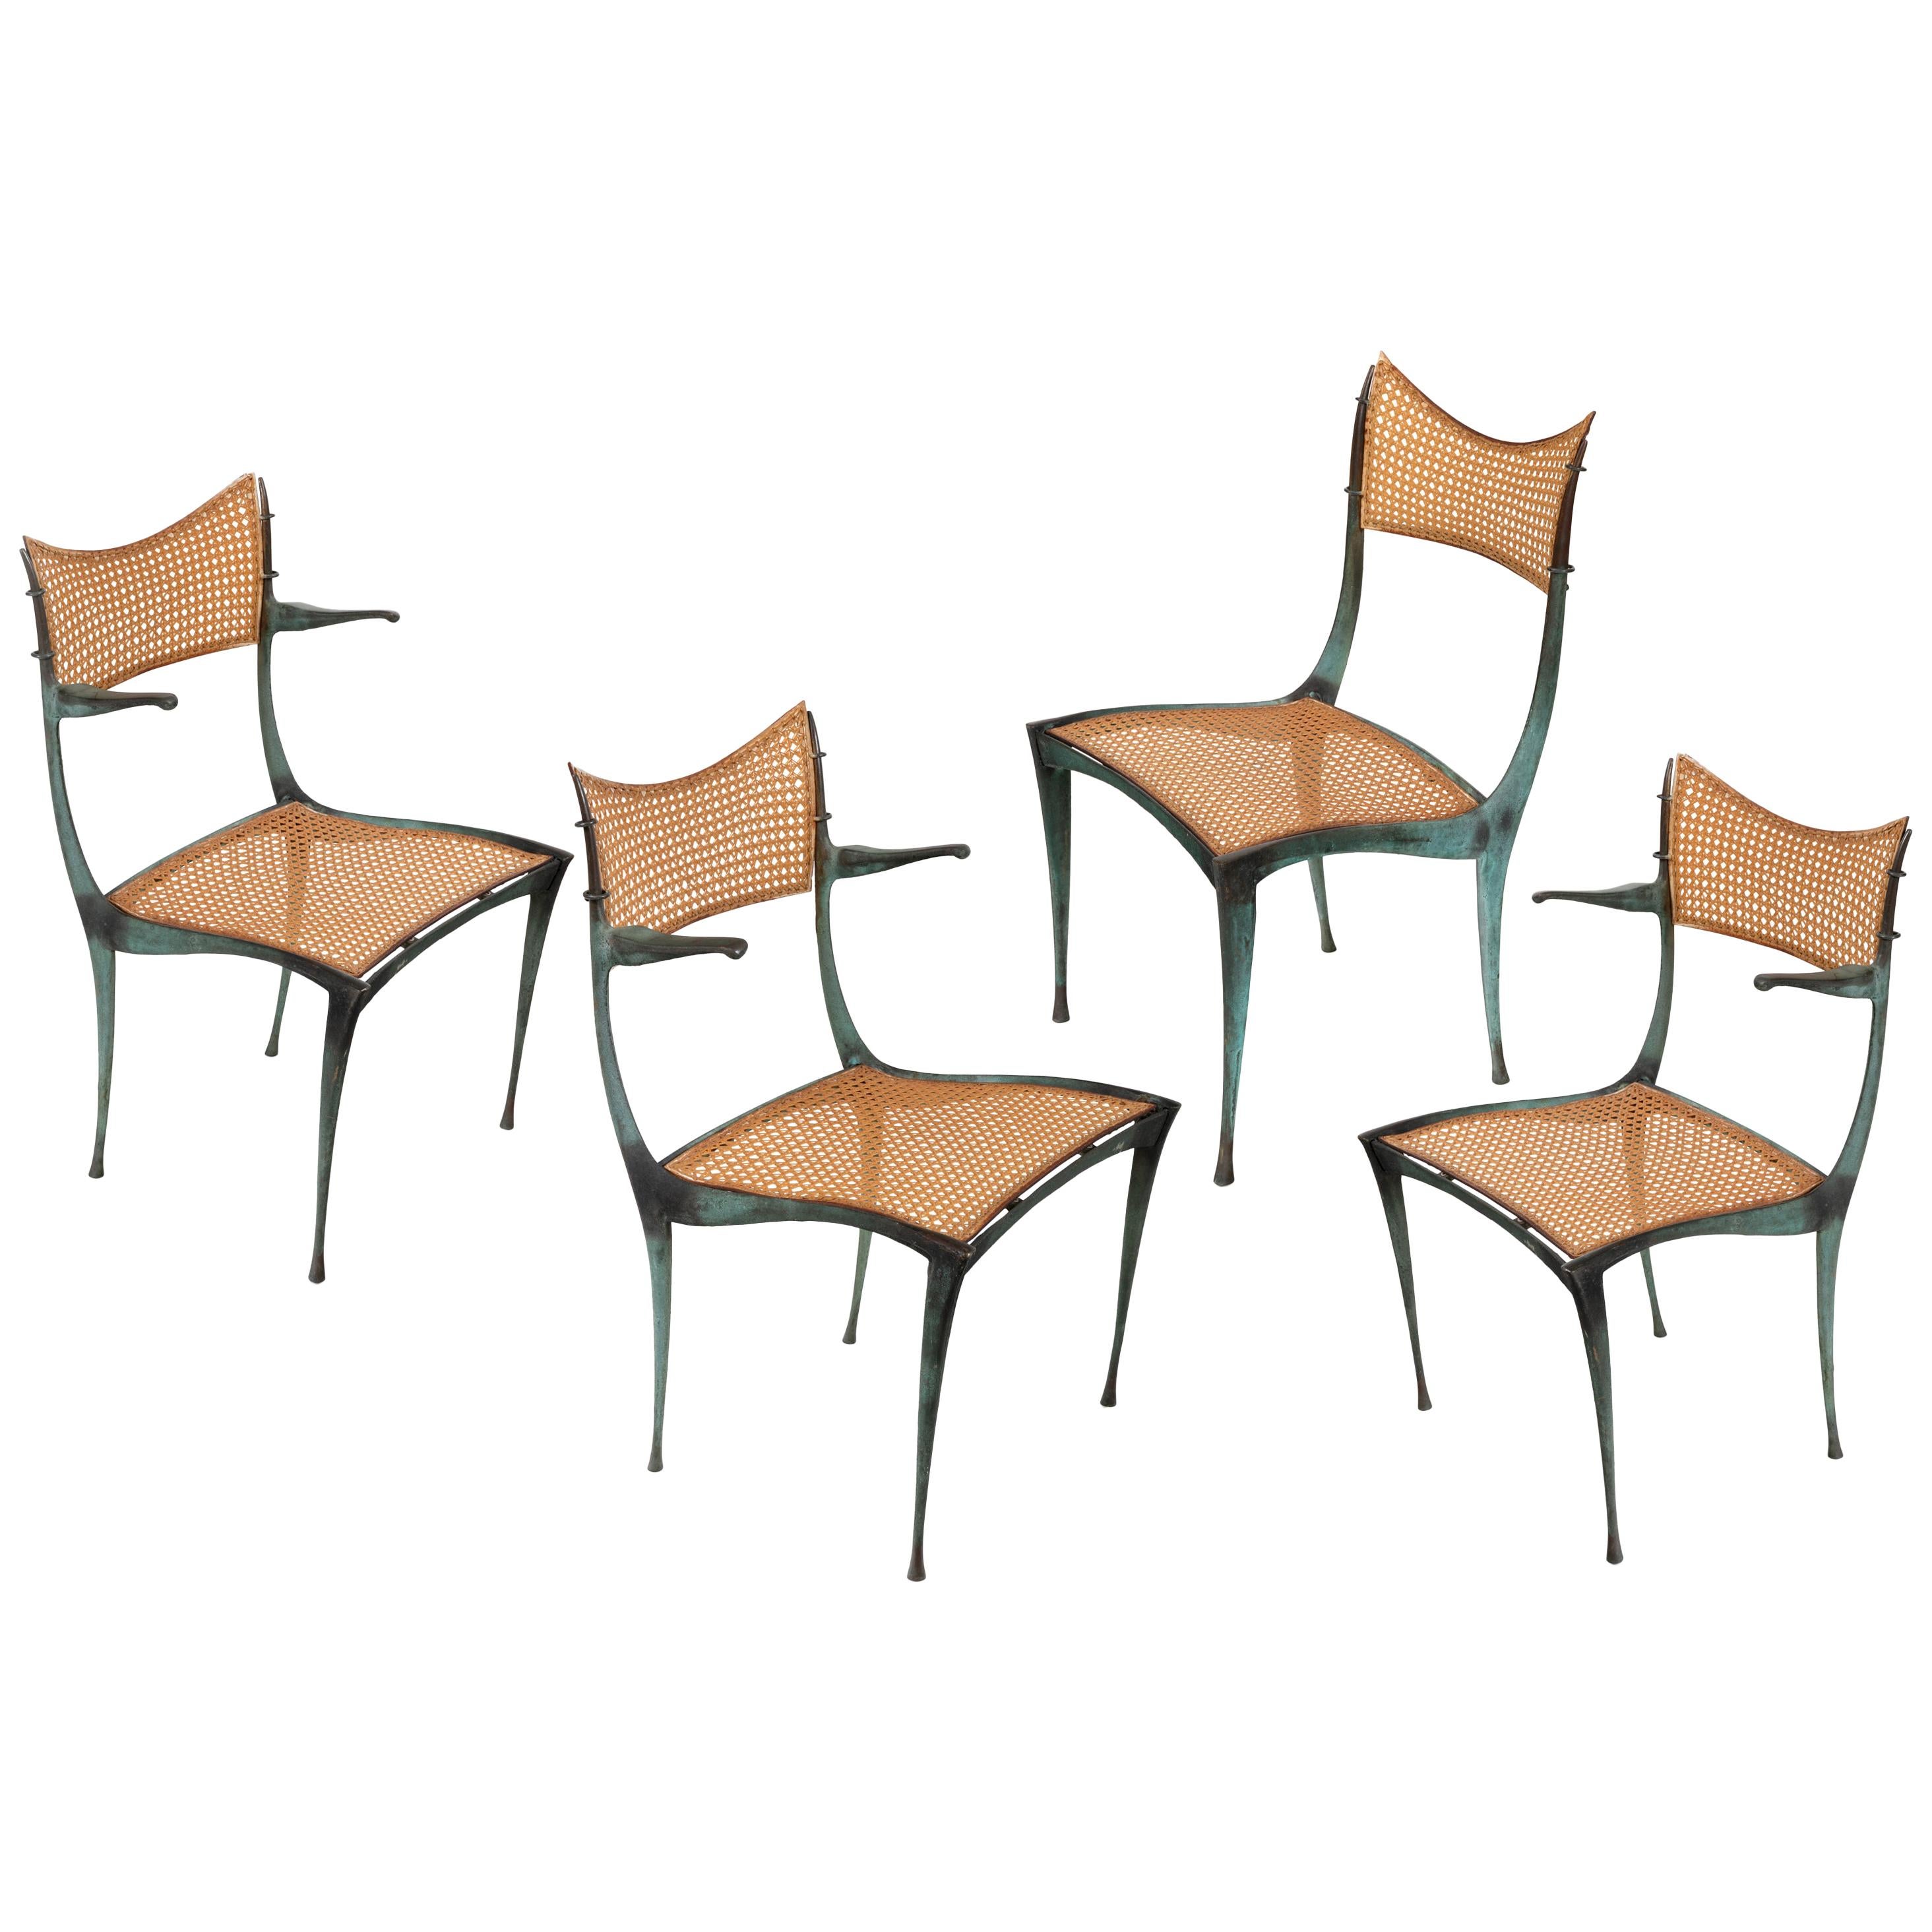 Dan Johnson Patinated Bronze and Cane "Gazelle' Chairs, USA 1950s